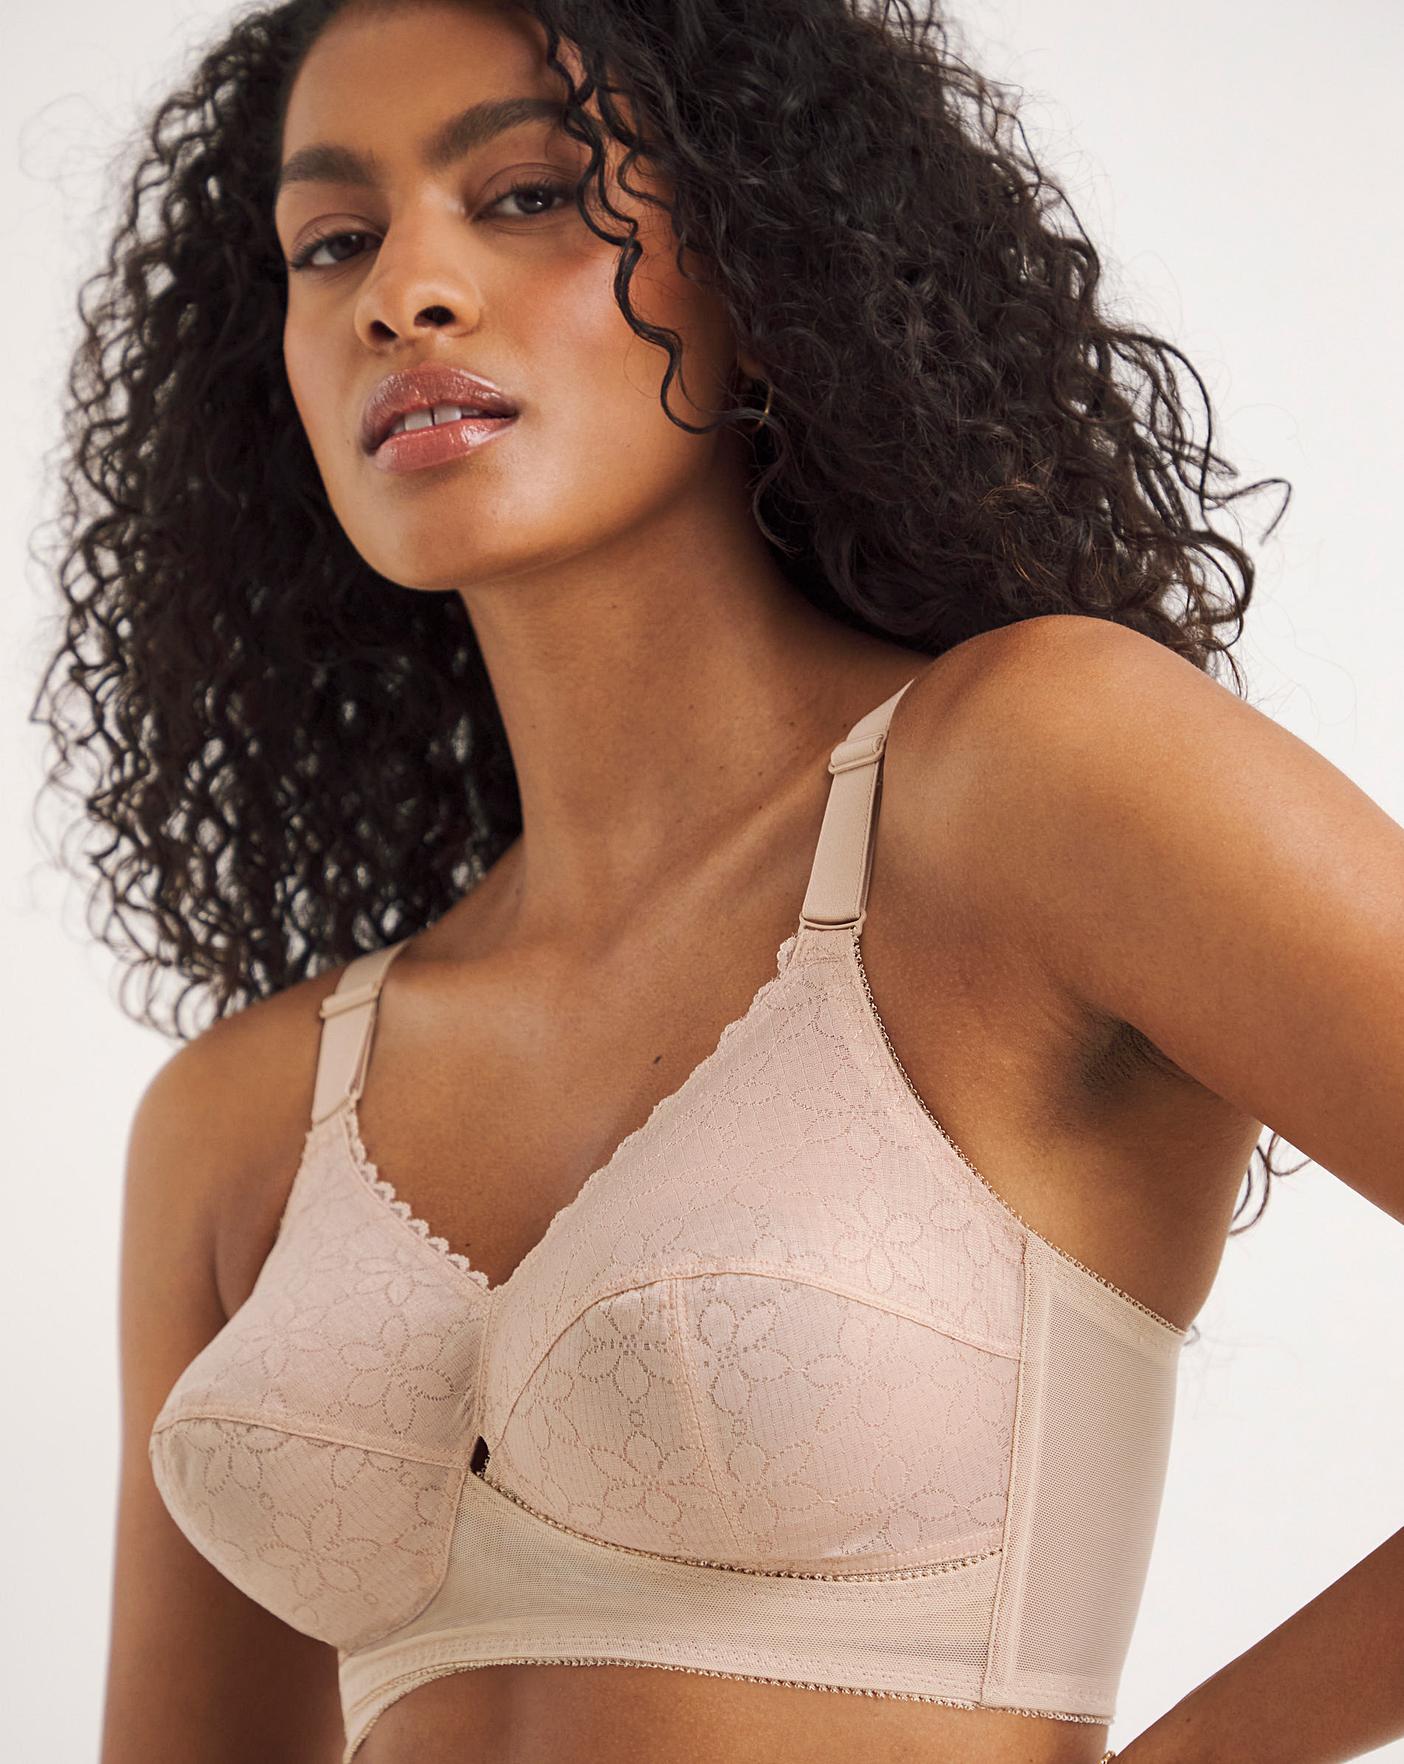 Berlei Classic Non-Wired Support Bra B510 Womens Full Cup Everyday Bras